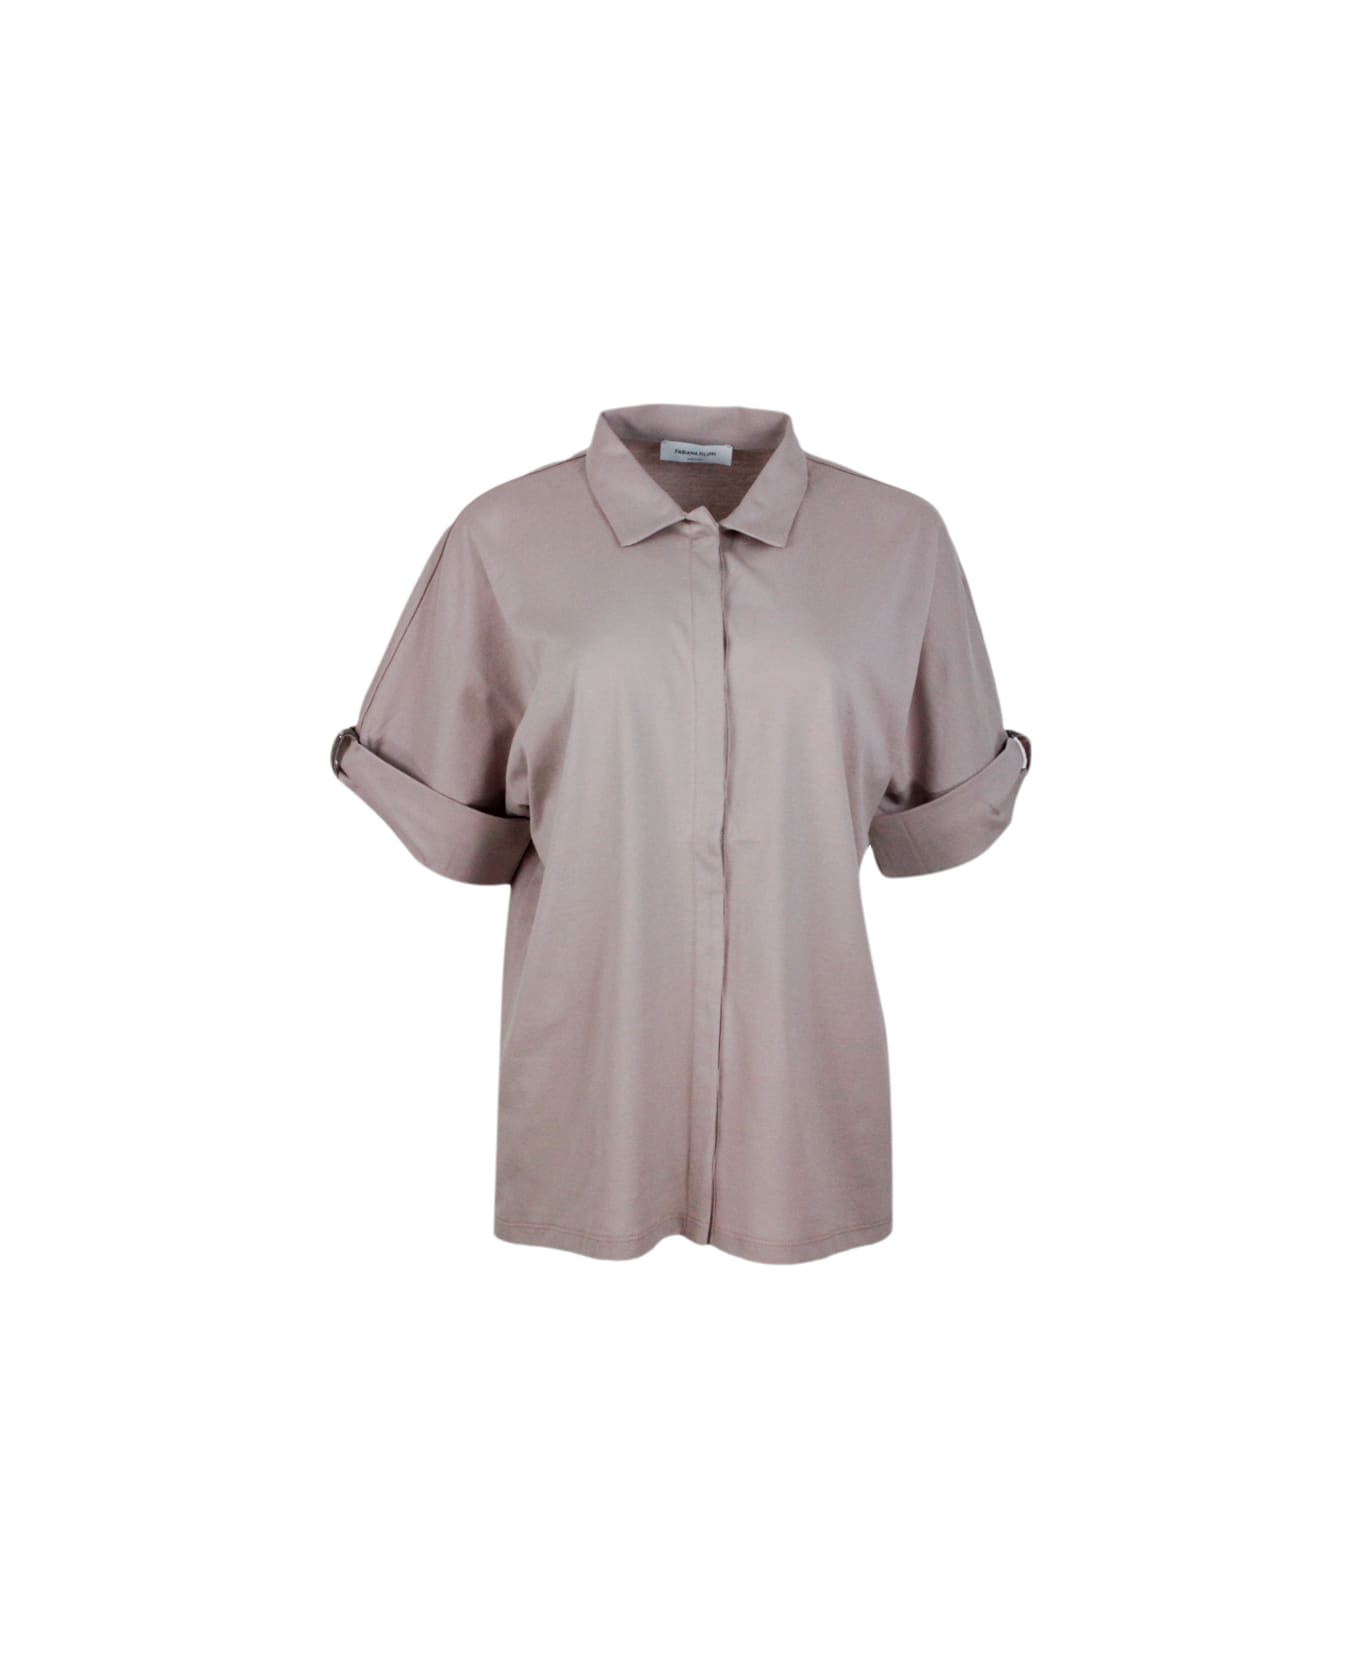 Fabiana Filippi Polo Shirt In Stretch Cotton Jersey With Short Sleeves And Cuffs Embellished With Jewels - Pink